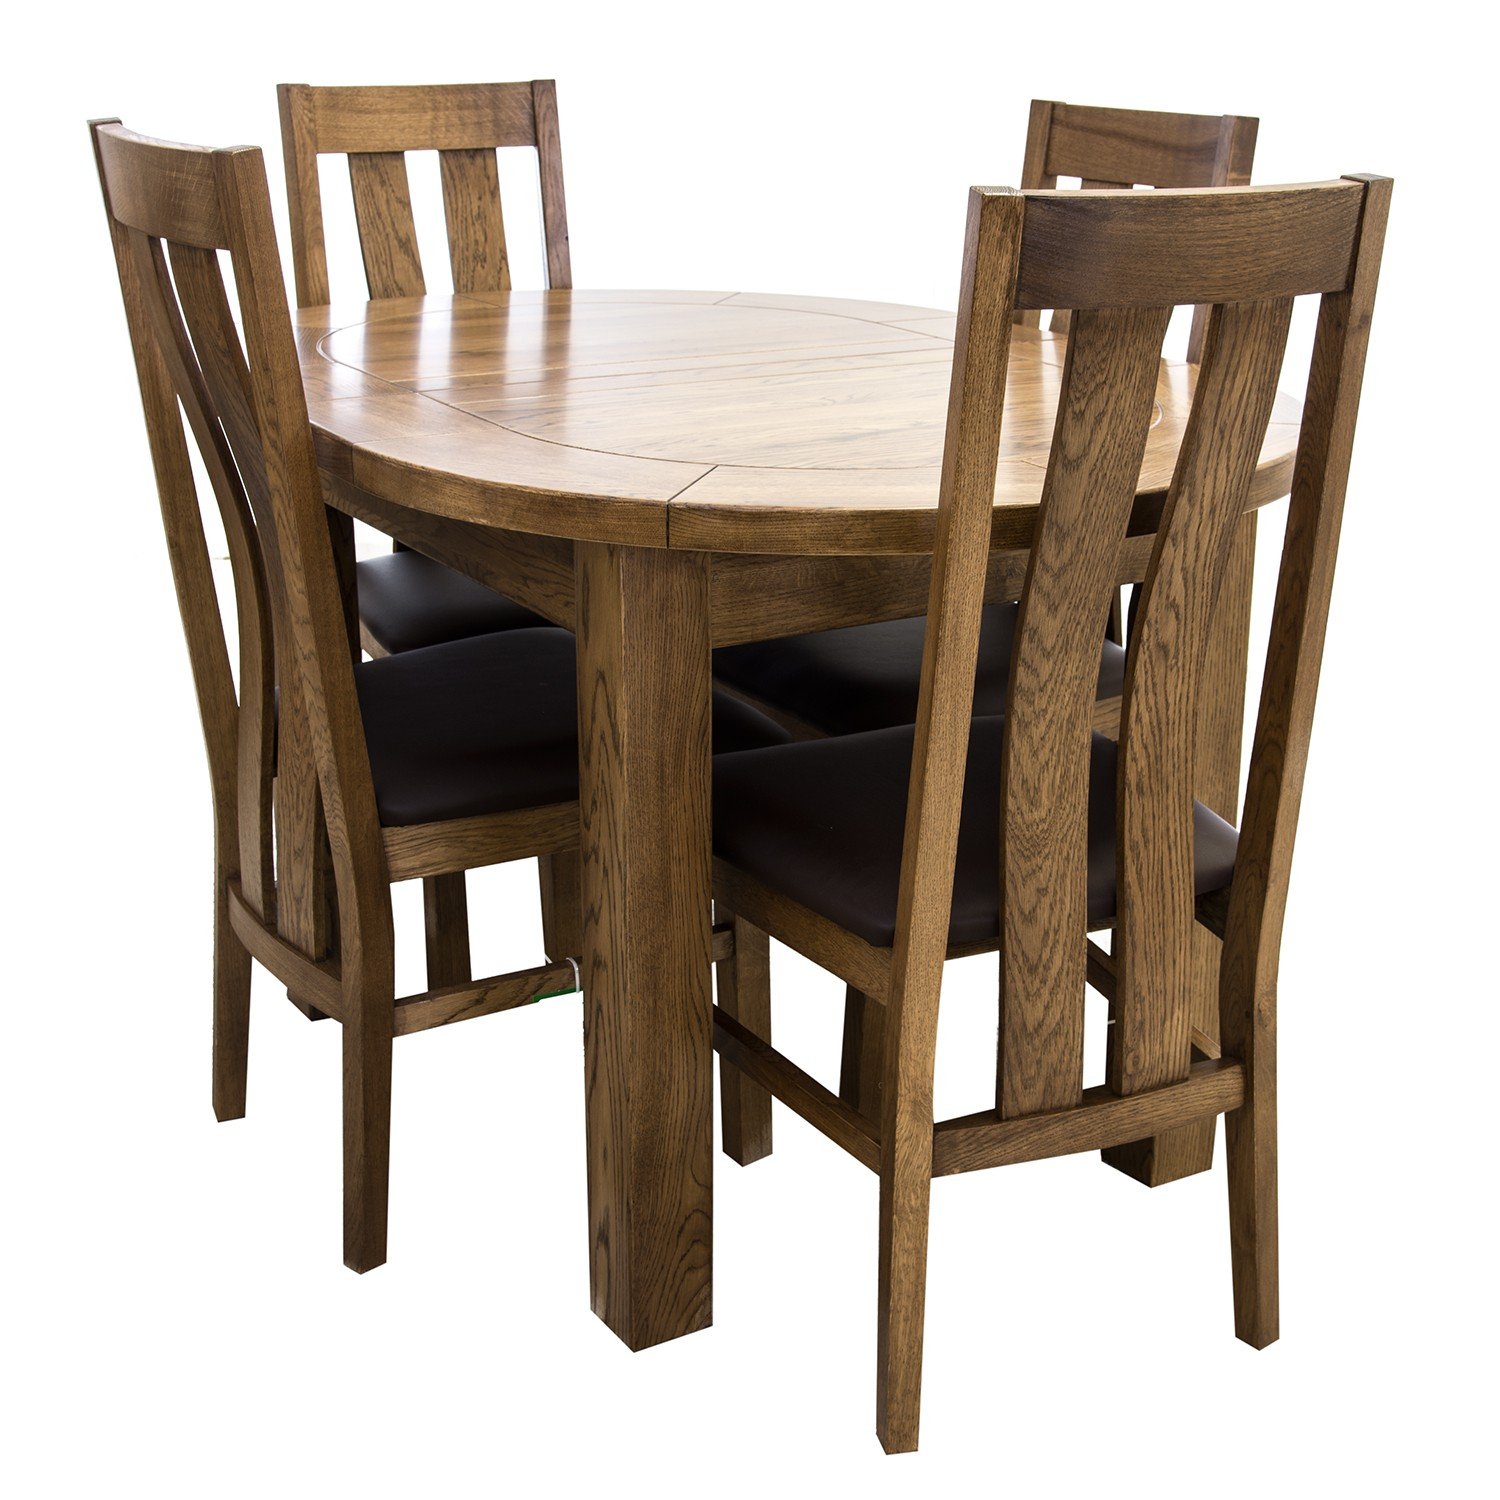 The Range Dining Table And Four Chairs • Faucet Ideas Site